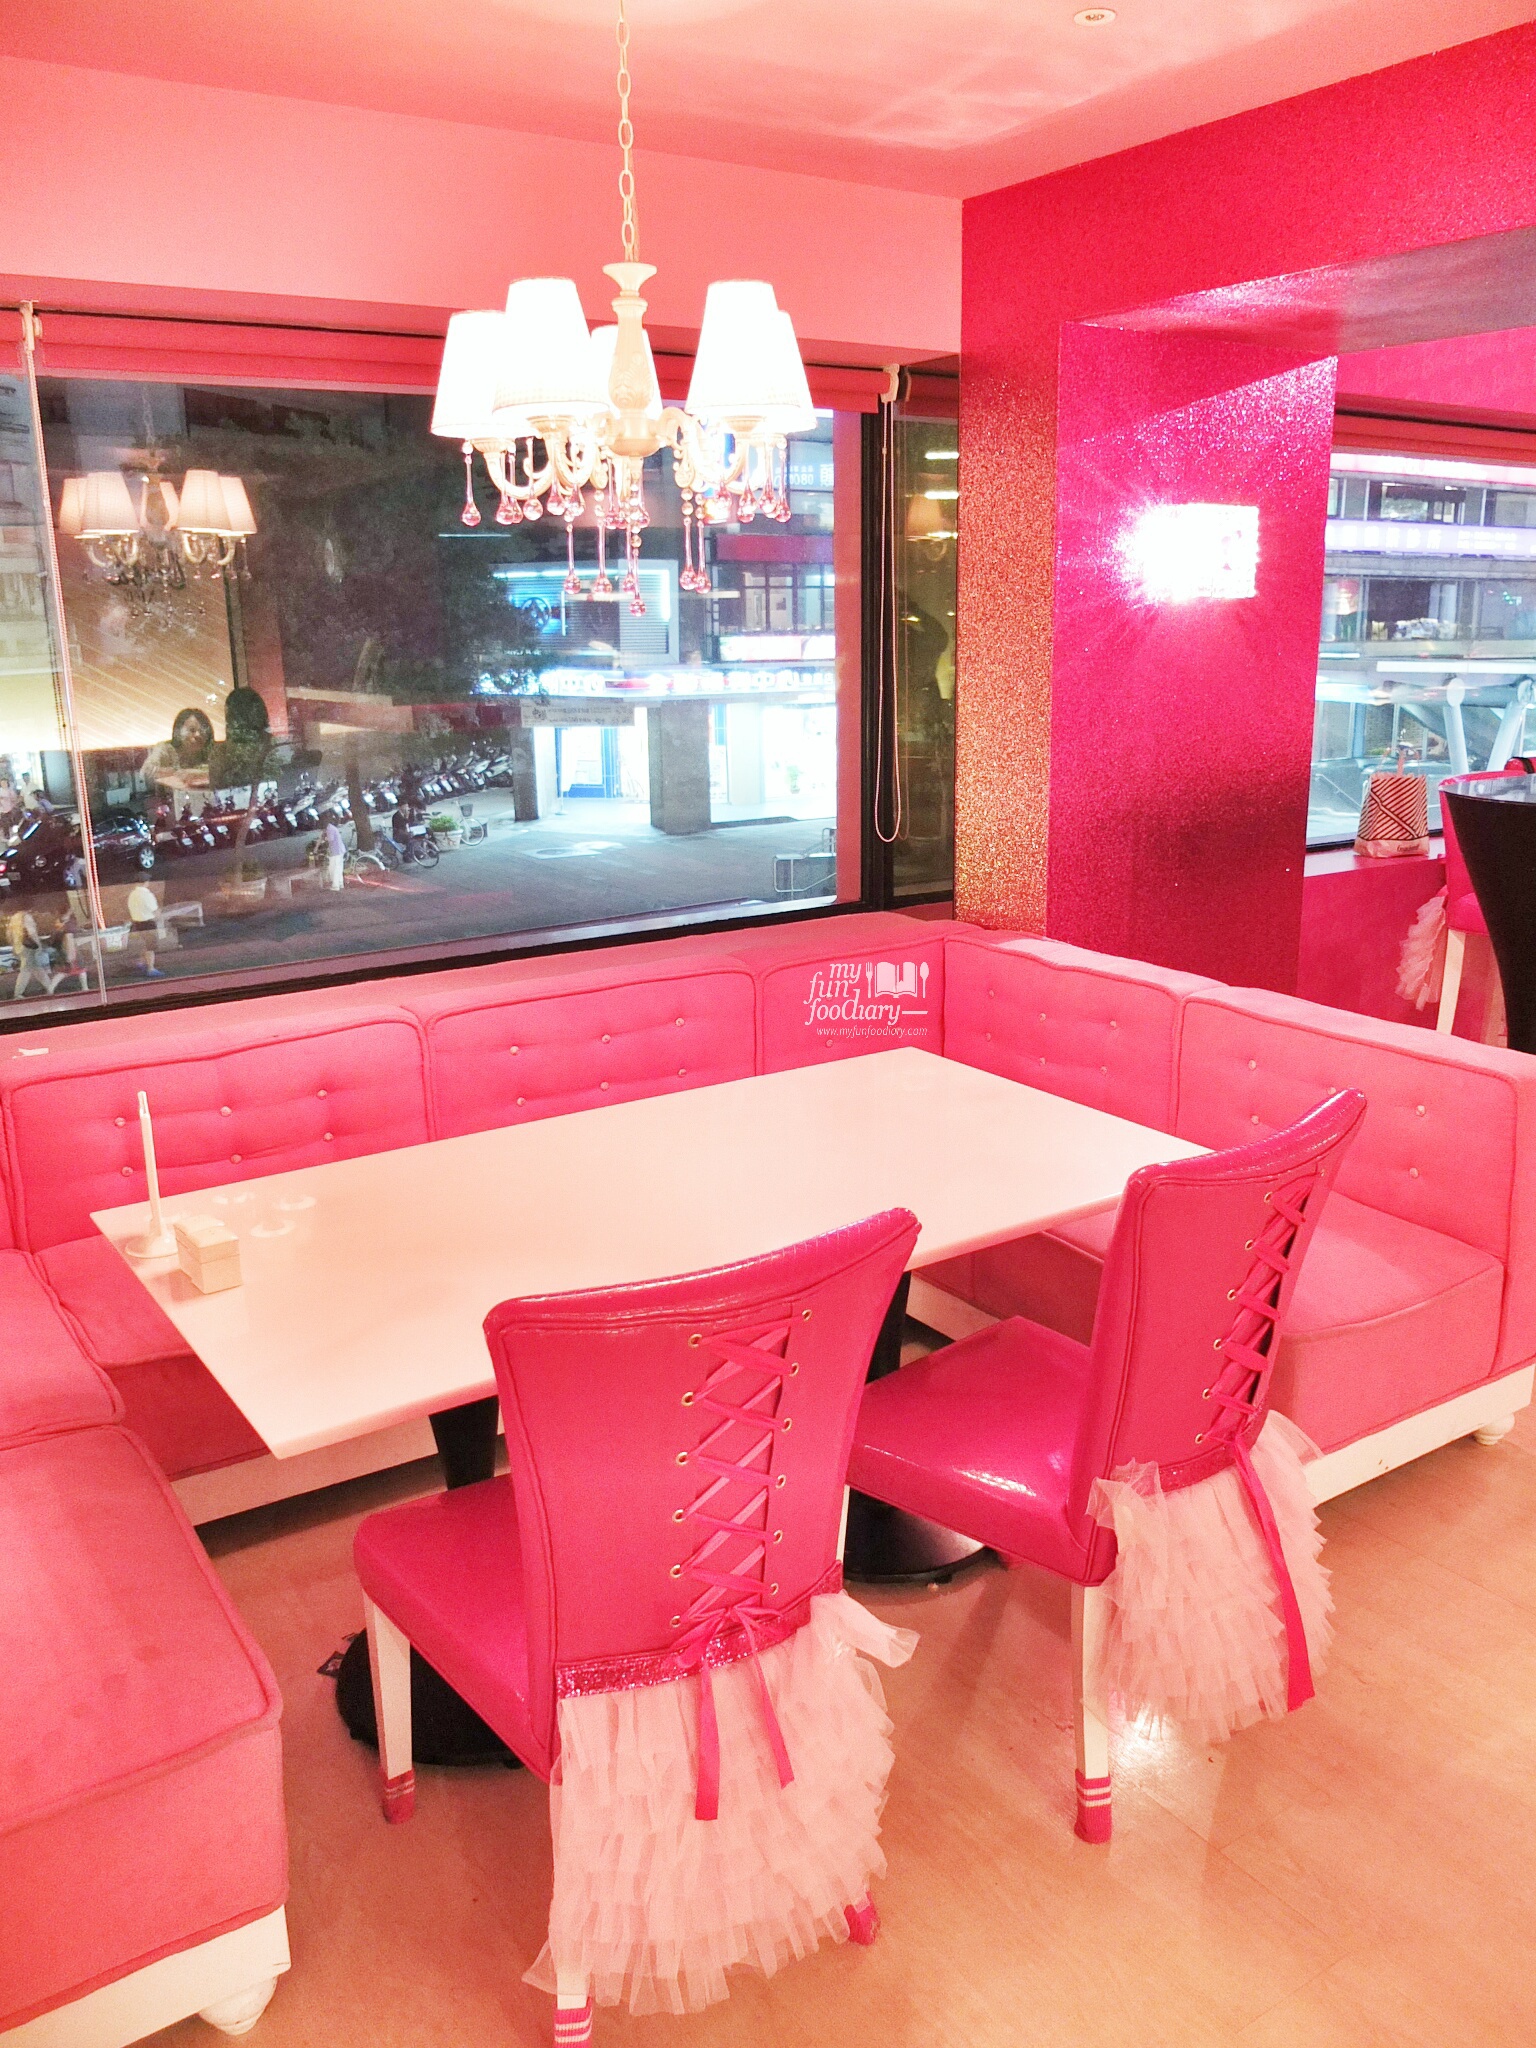 Table Seating at Barbie Cafe Taiwan by Myfunfoodiary